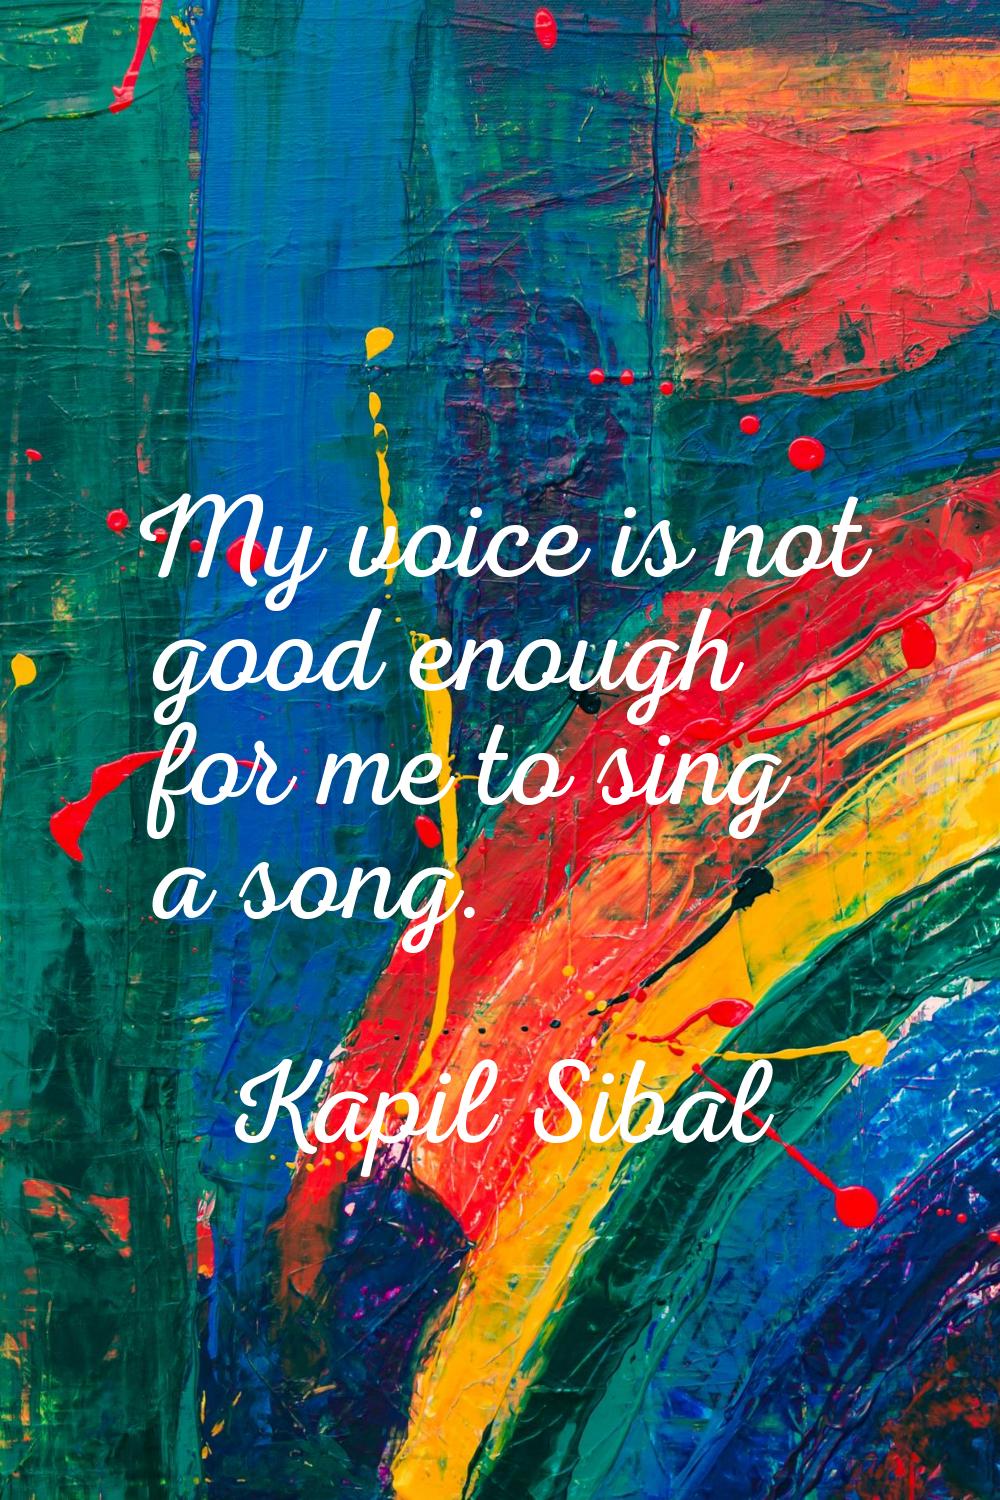 My voice is not good enough for me to sing a song.